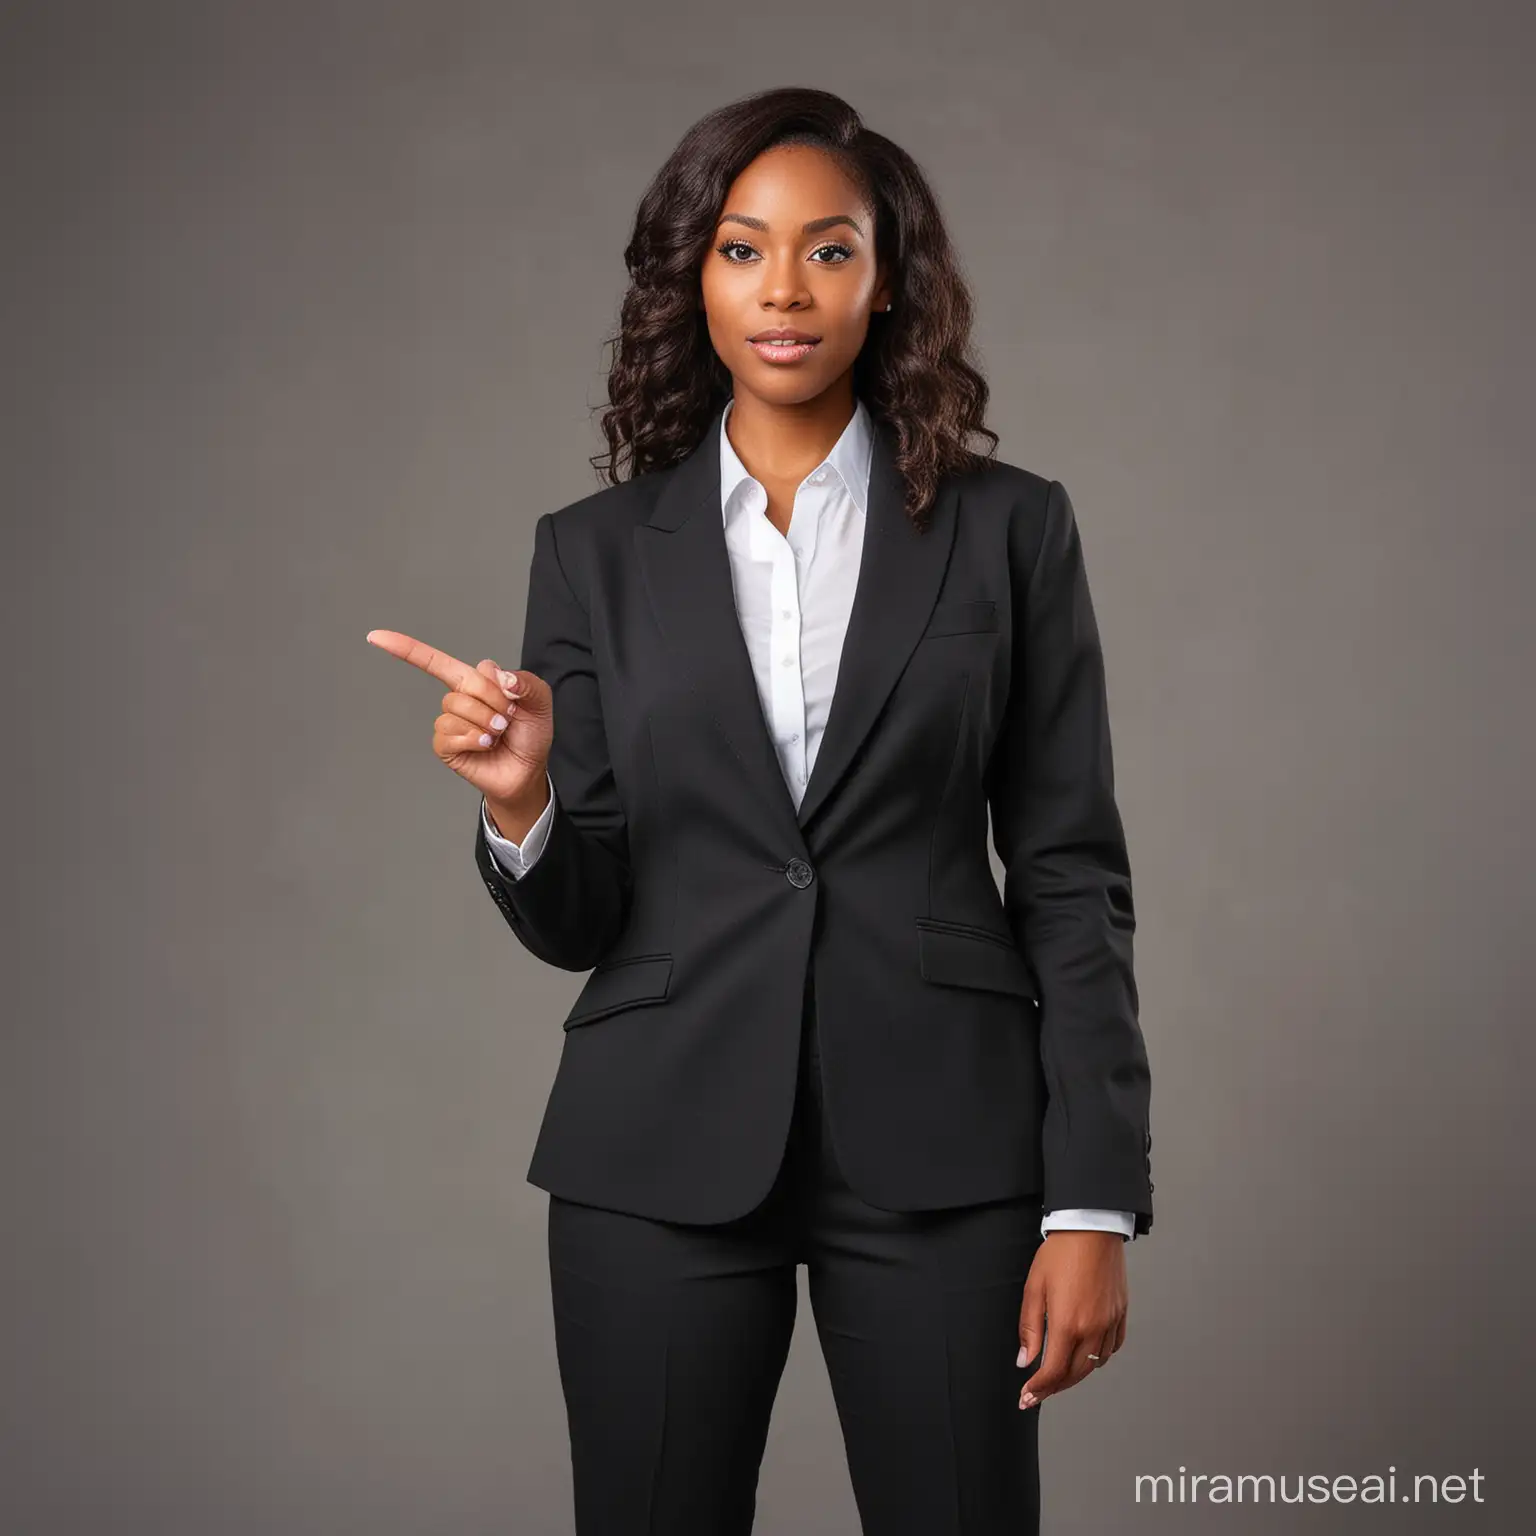 Professional Black Businesswoman Pointing in Formal Attire